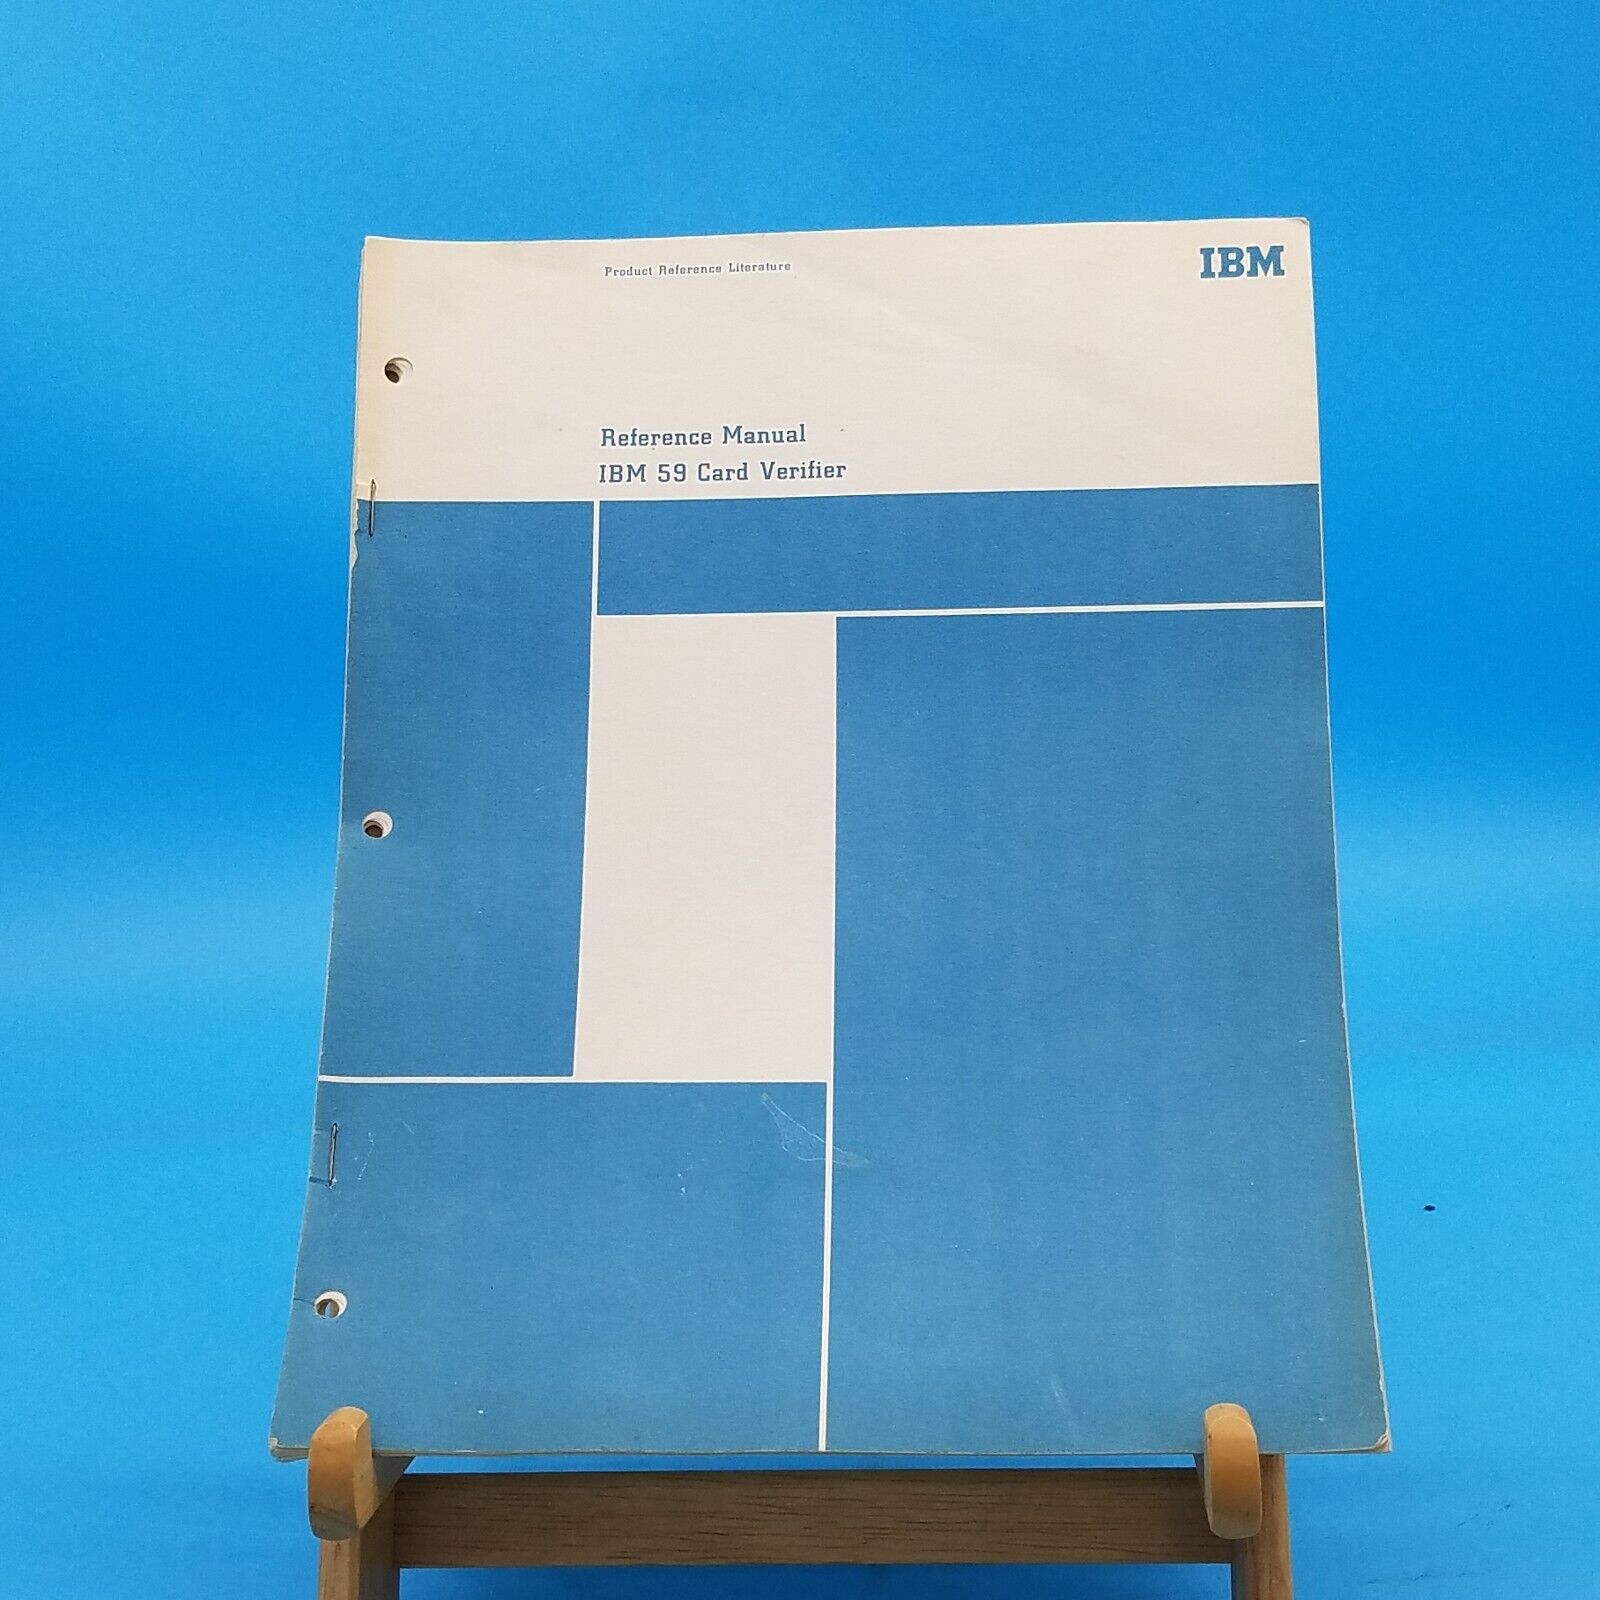 Reference manual IBM 59 card verifier 36 pages pamphlet